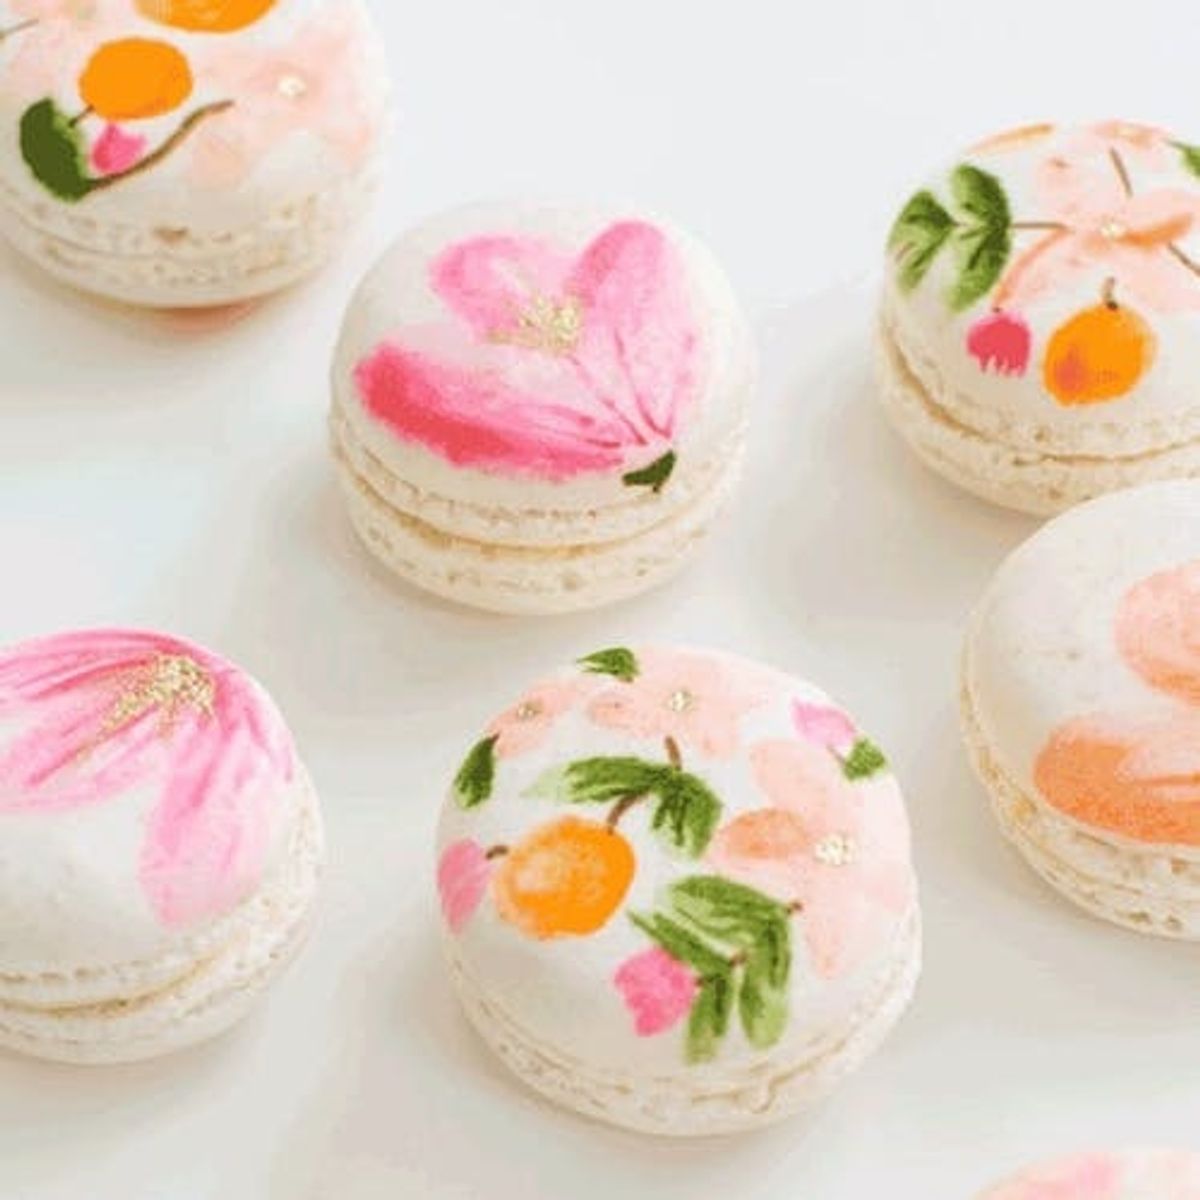 14 Edible Ways to Give Mom Flowers